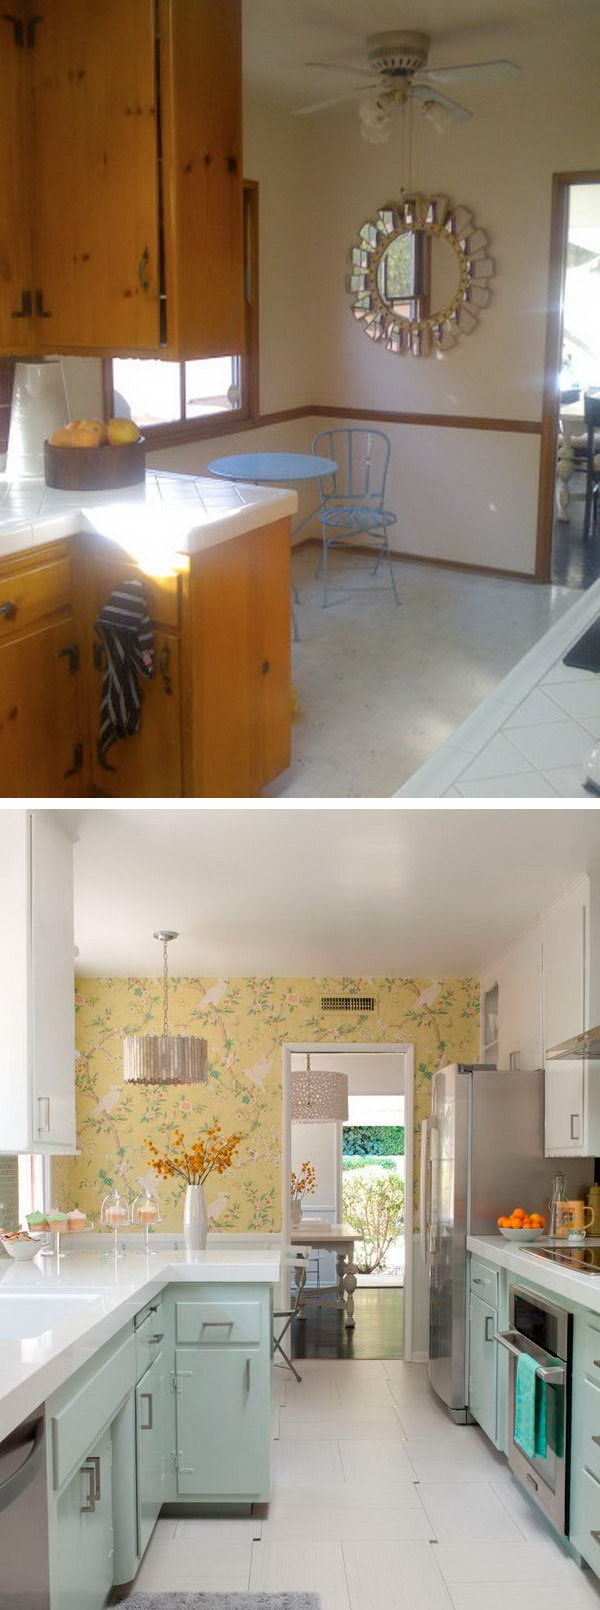 Before & After: A 1950s kitchen gets an affordable upgrade. Incredible renovation with a limited budget and time frame, a major overhaul can be done on an outdated kitchen. 